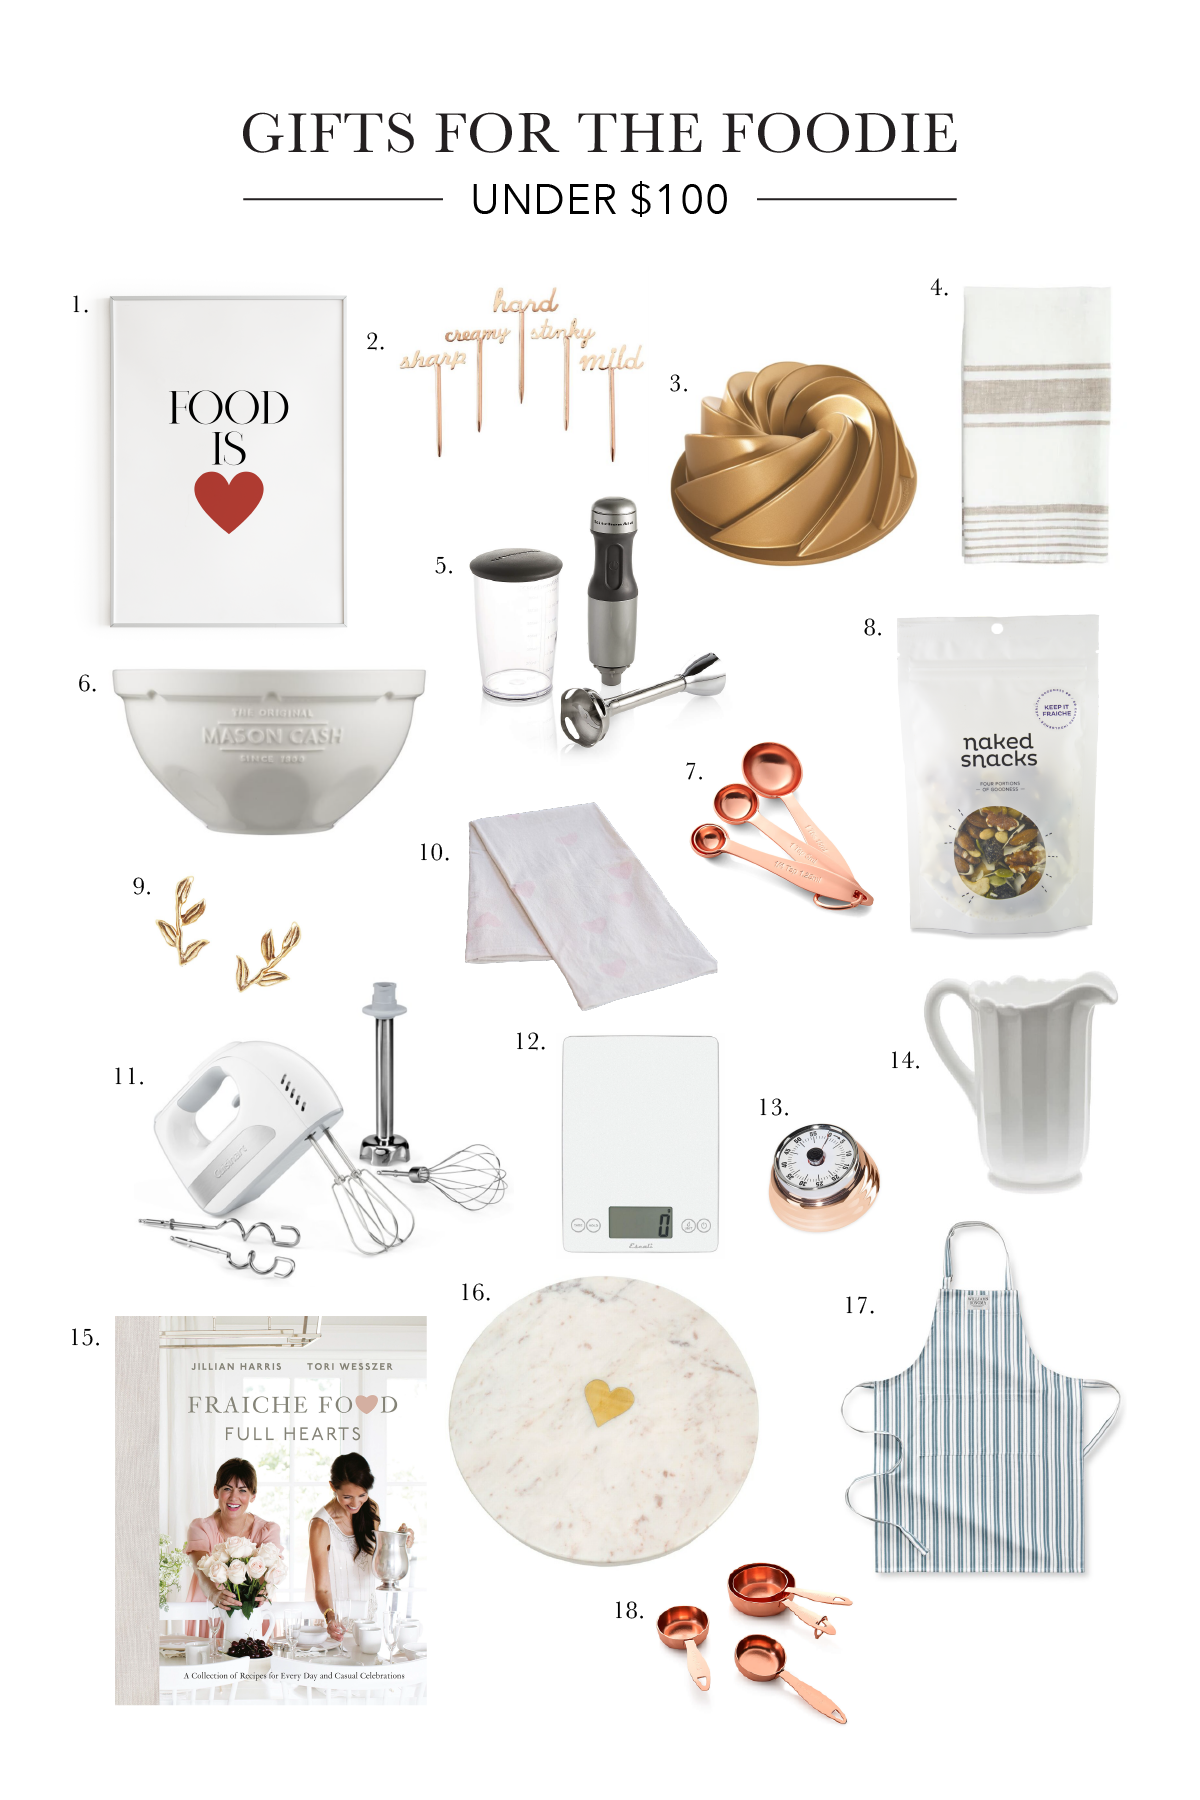 Under $100 Gift Guide For The Foodie